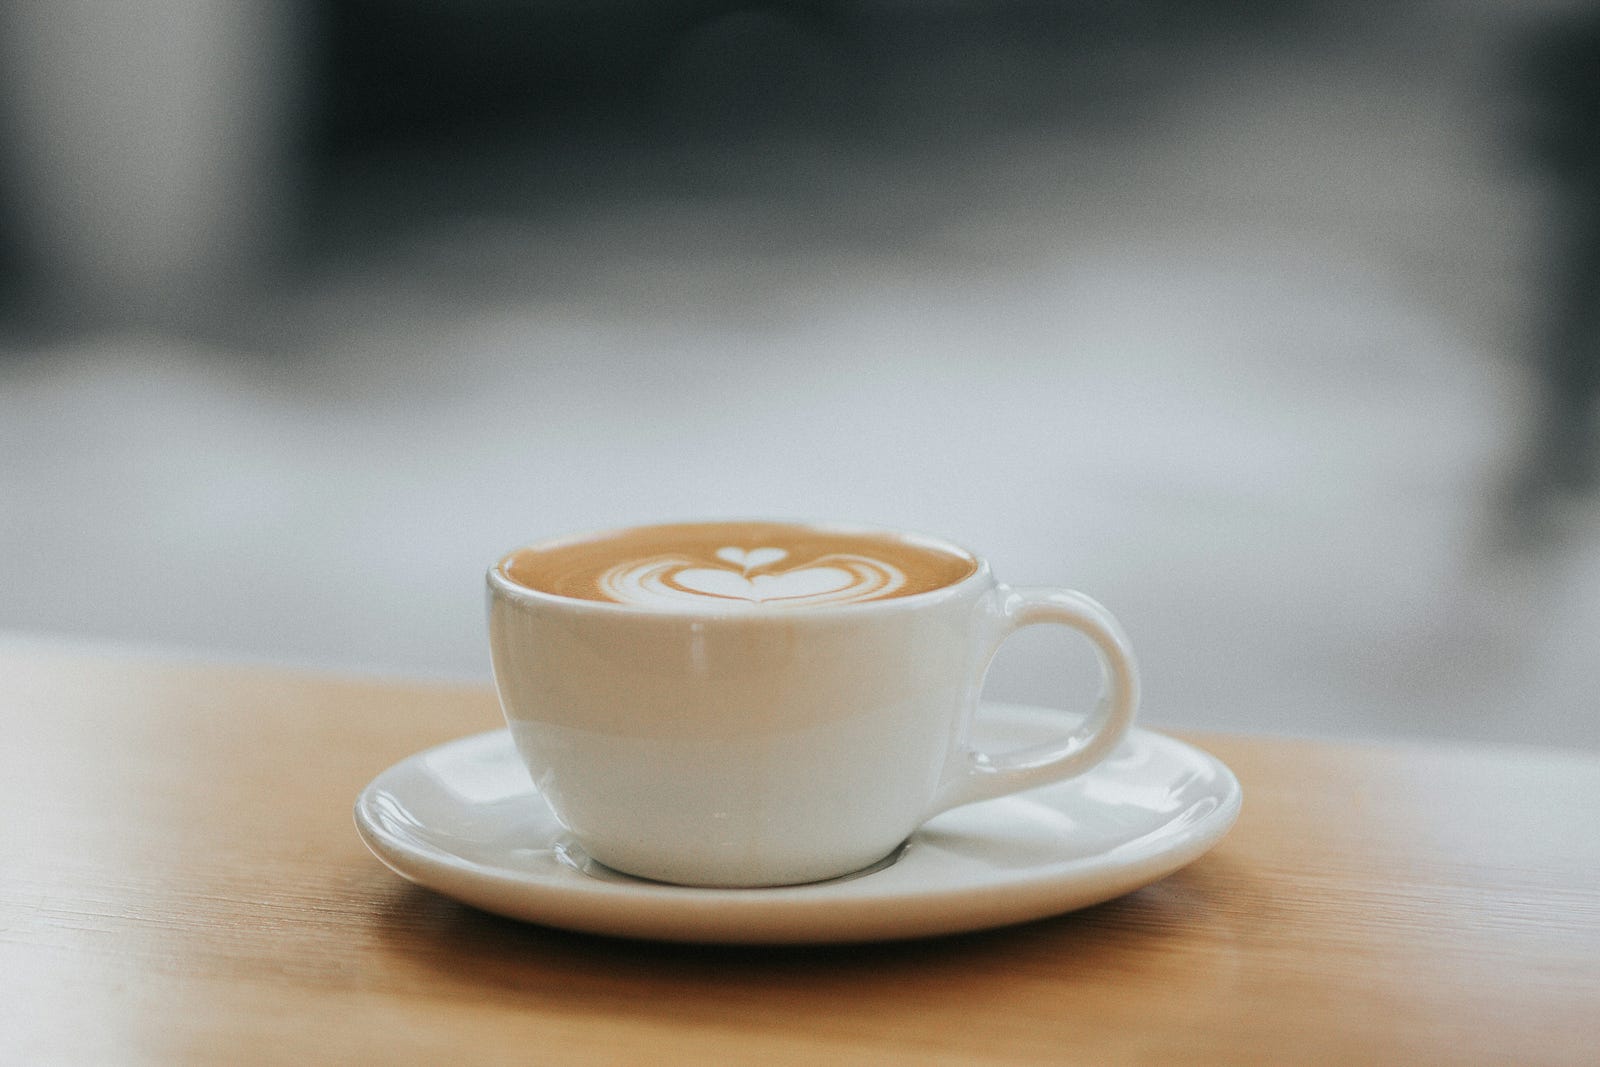 A white saucer, with a white cup filled with a cafe latte.